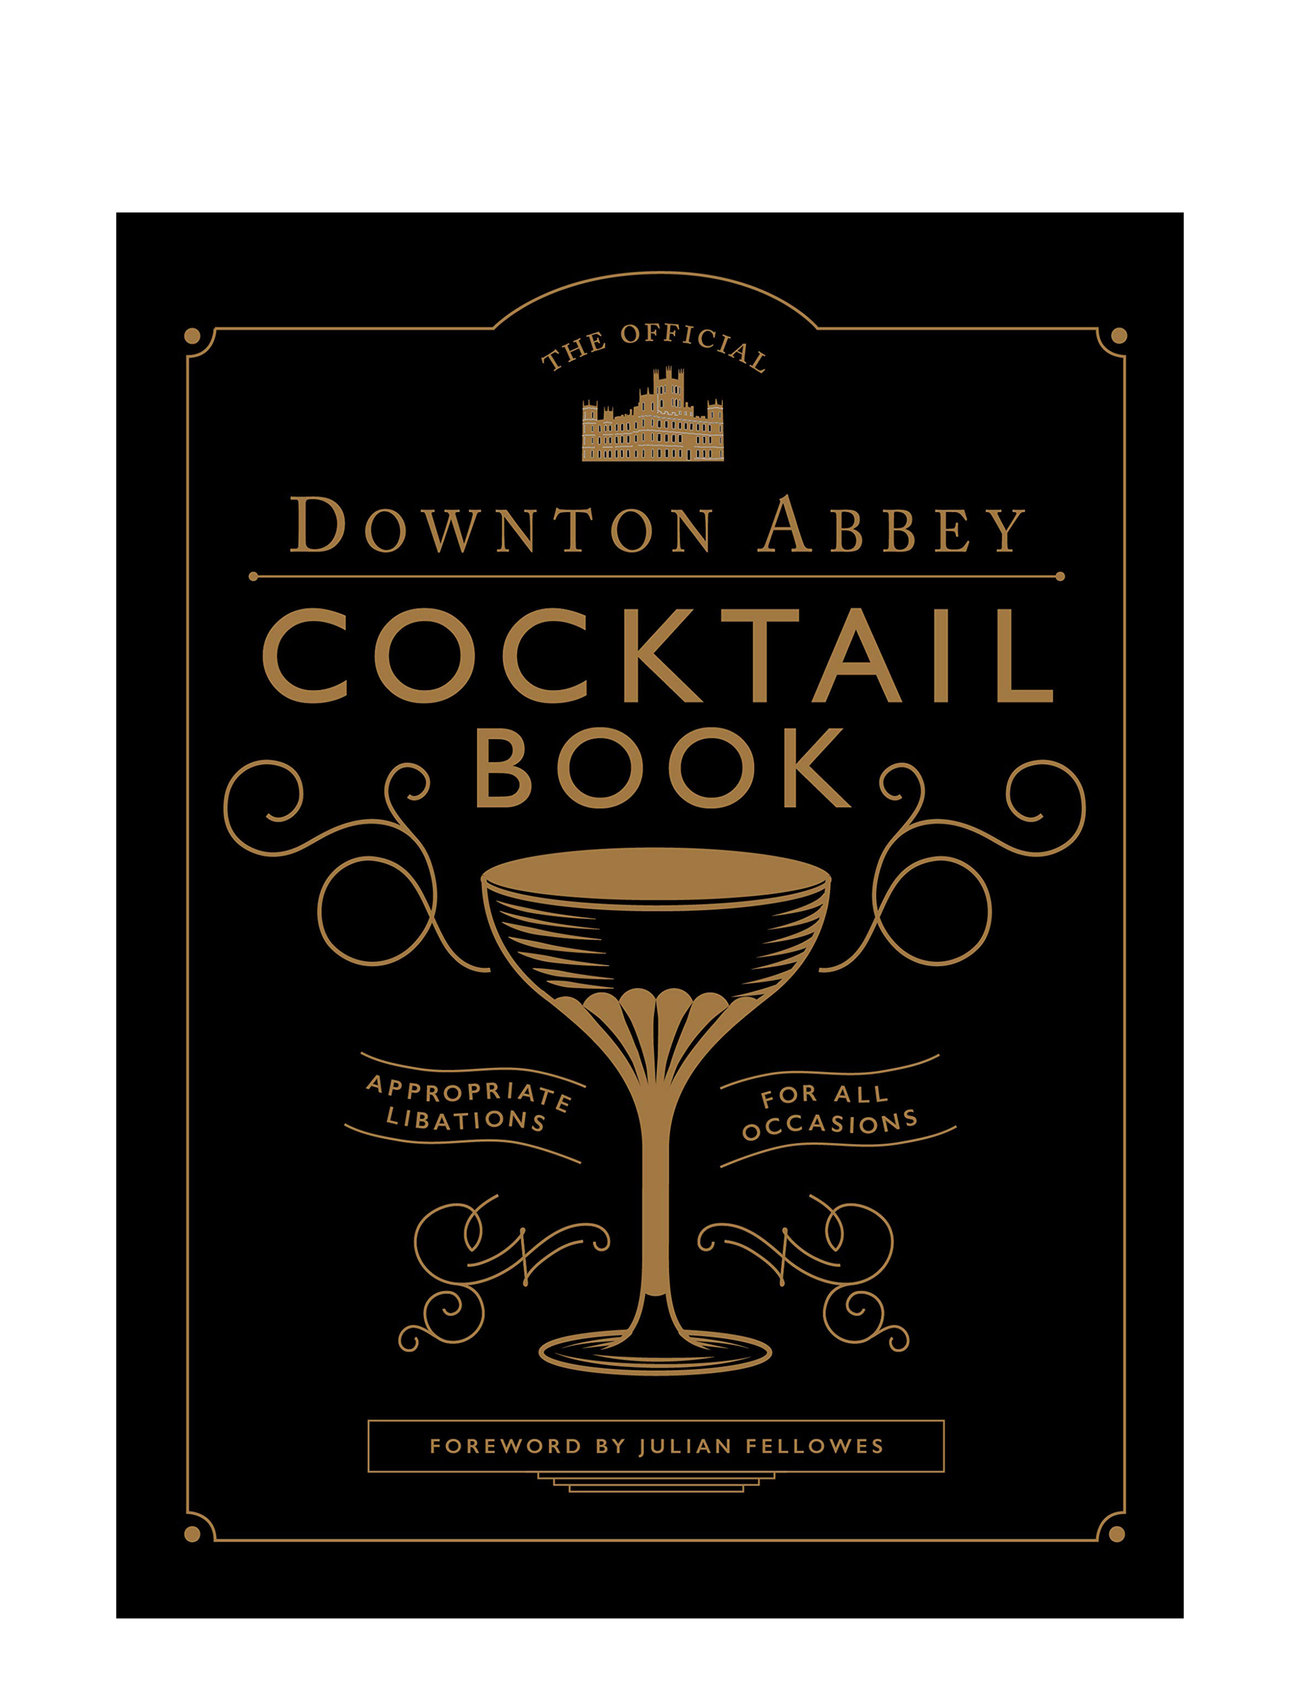 Downton Abbey Cocktail Book Home Tableware Drink & Bar Accessories Black New Mags